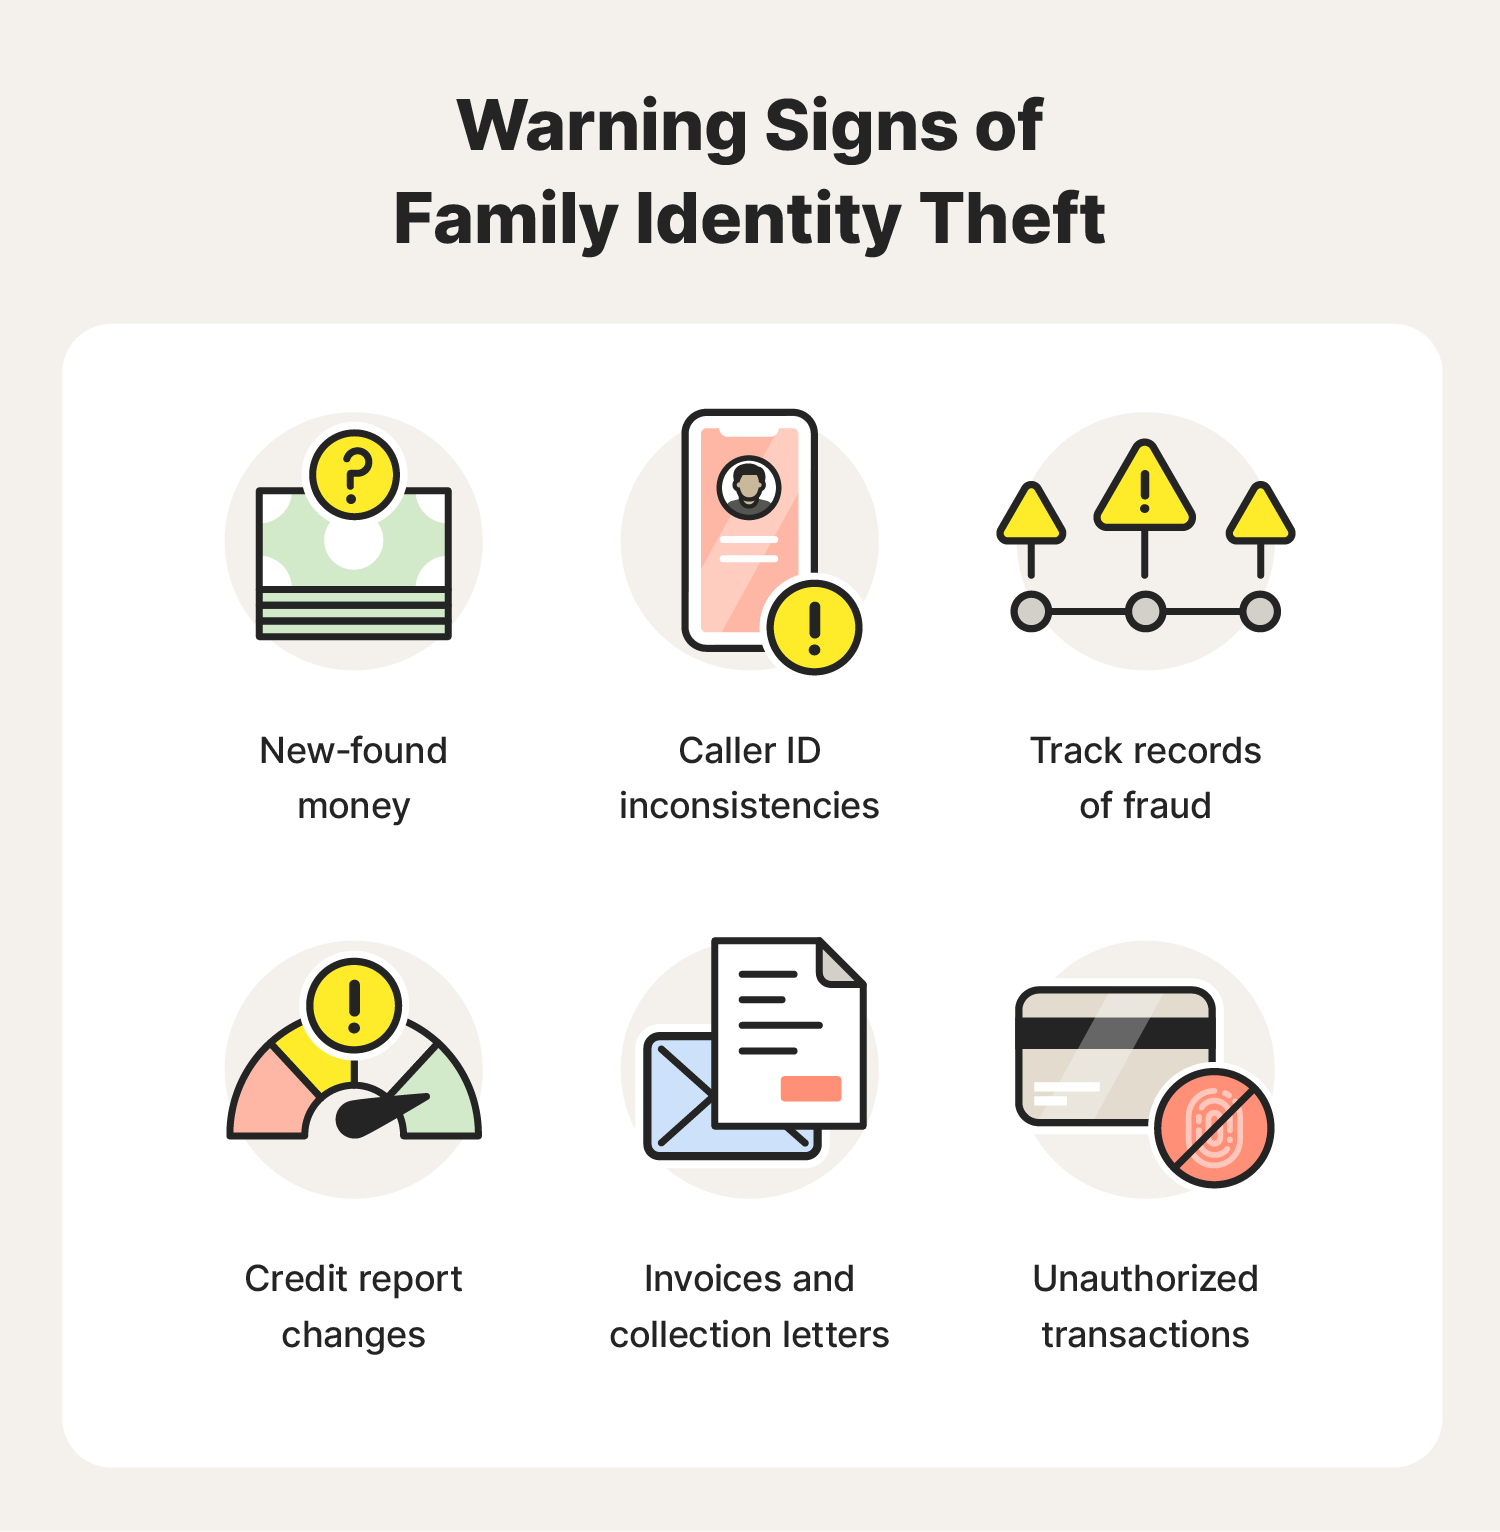 An image detailing the warning signs of family identity theft